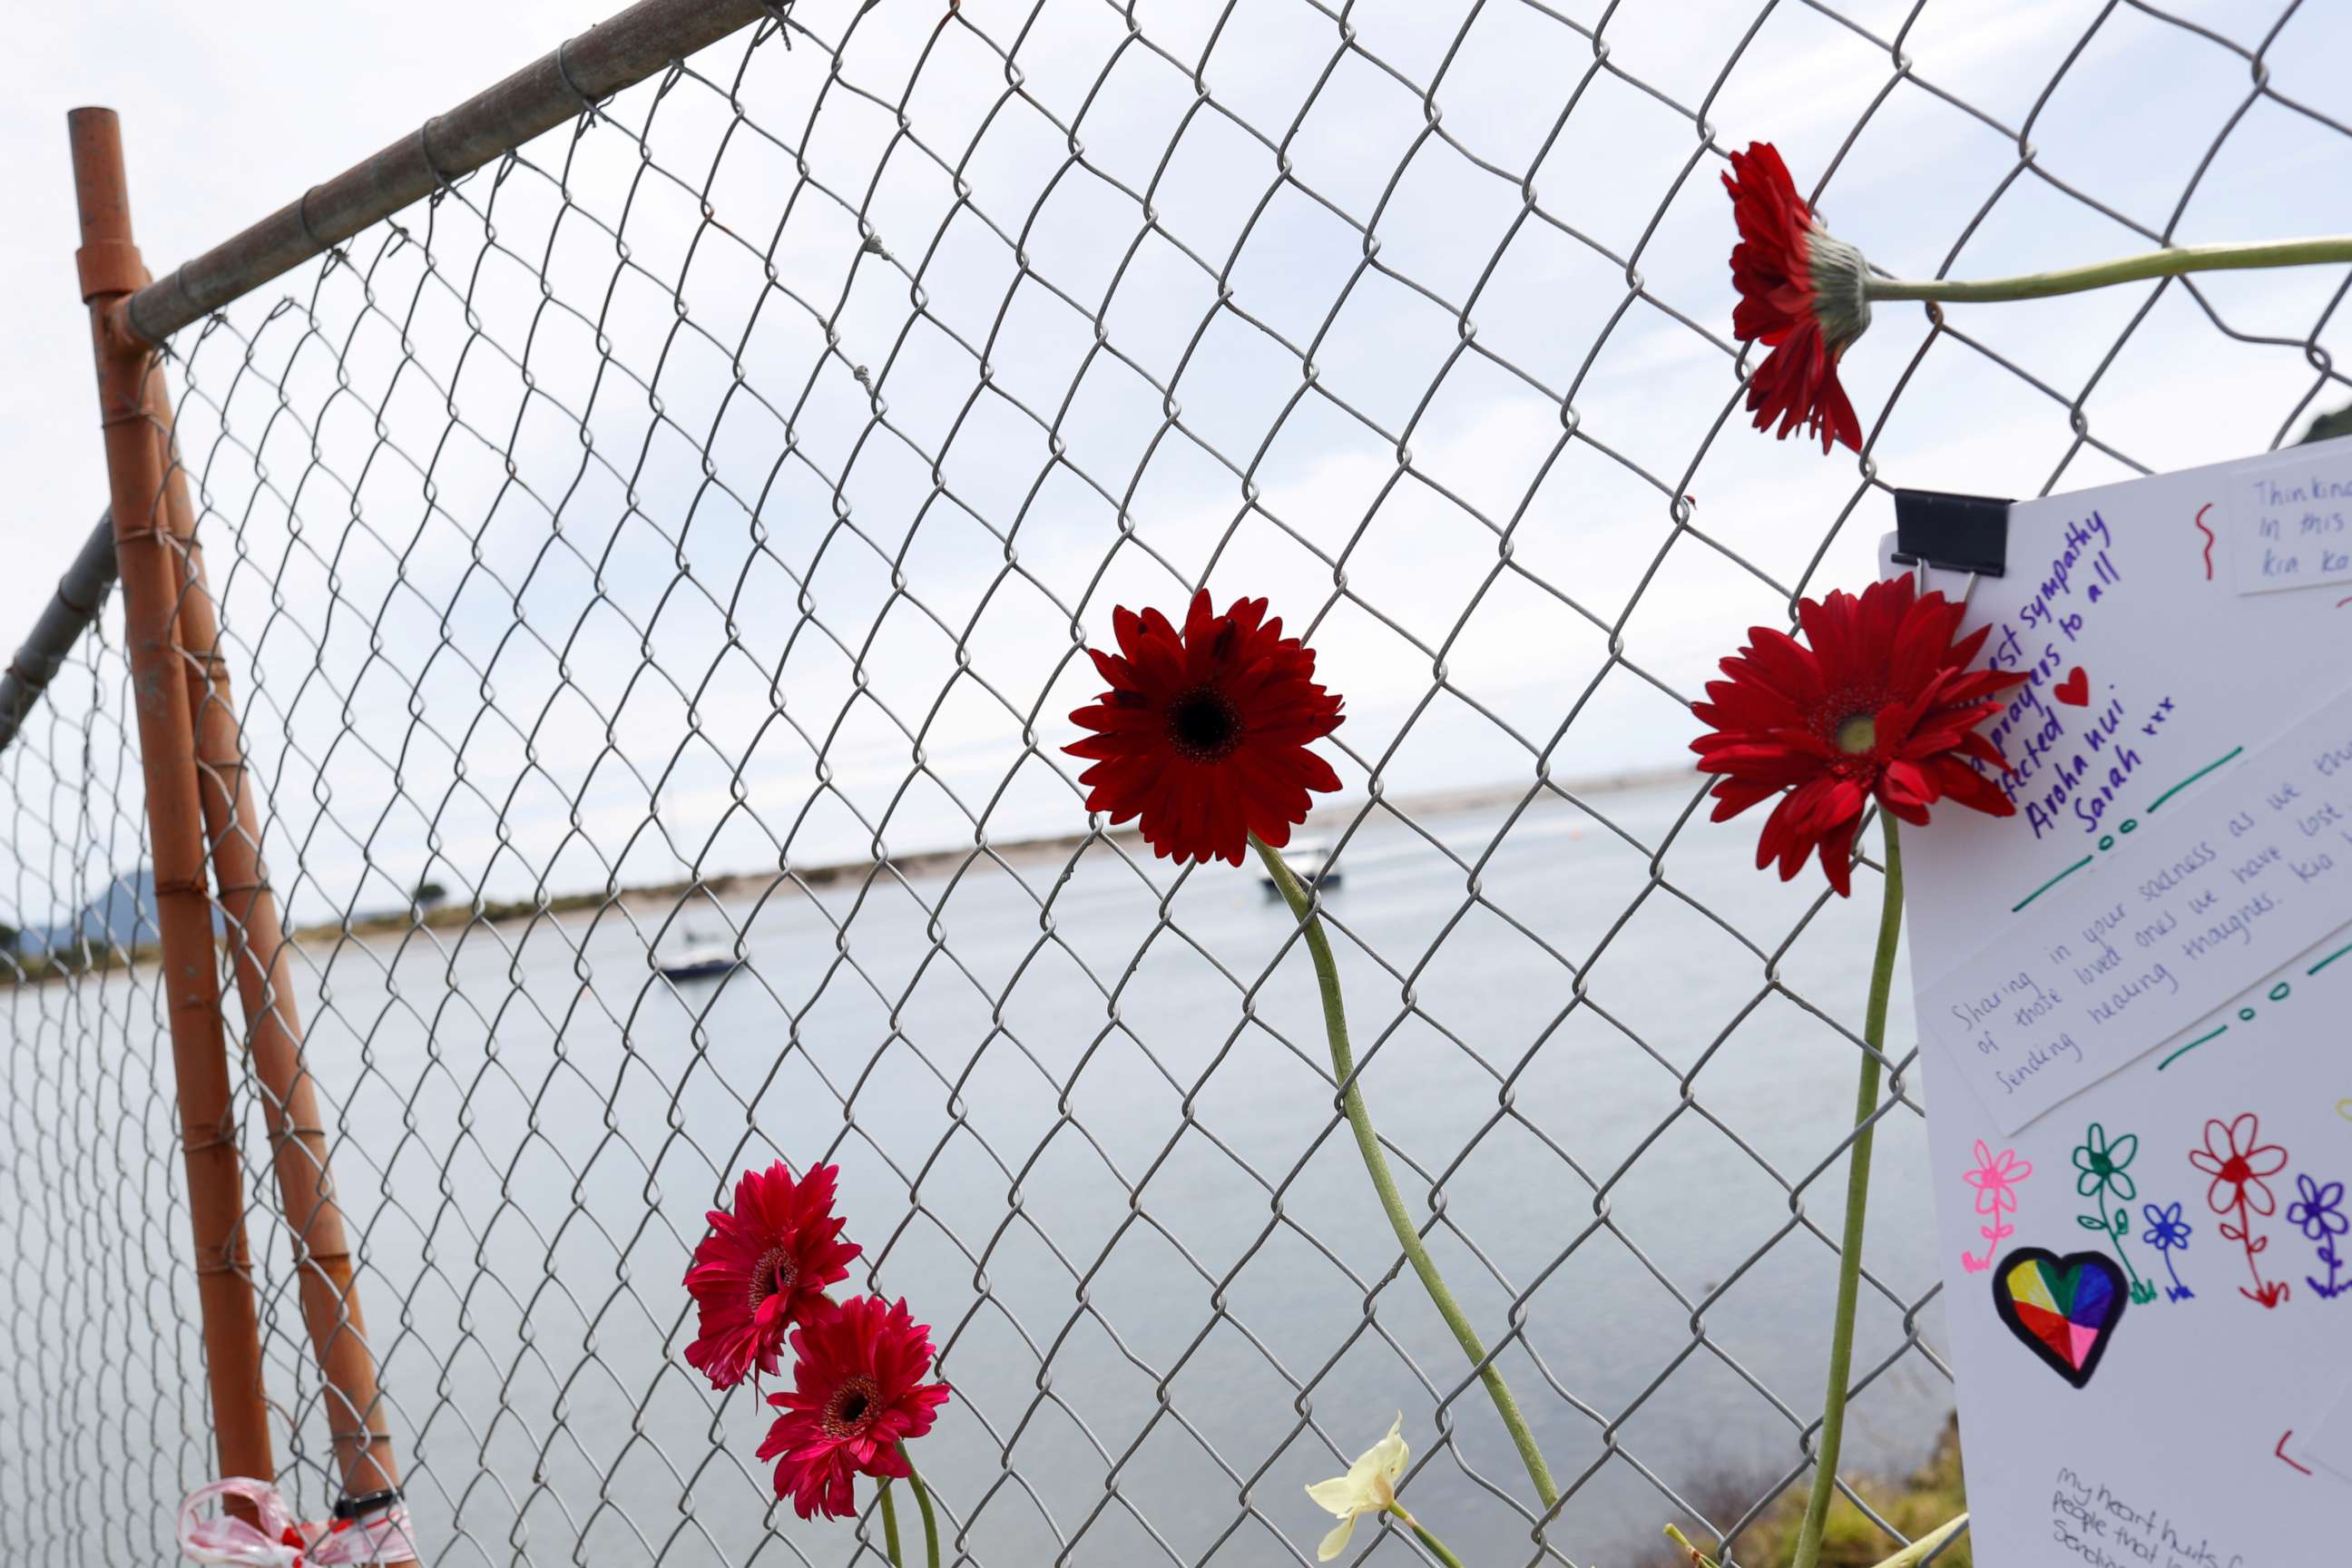 FILE PHOTO: Flowers are seen at a memorial at the harbor in Whakatane, Newzealand, on Dec. 11, 2019, following the volcanic eruption on White Island.